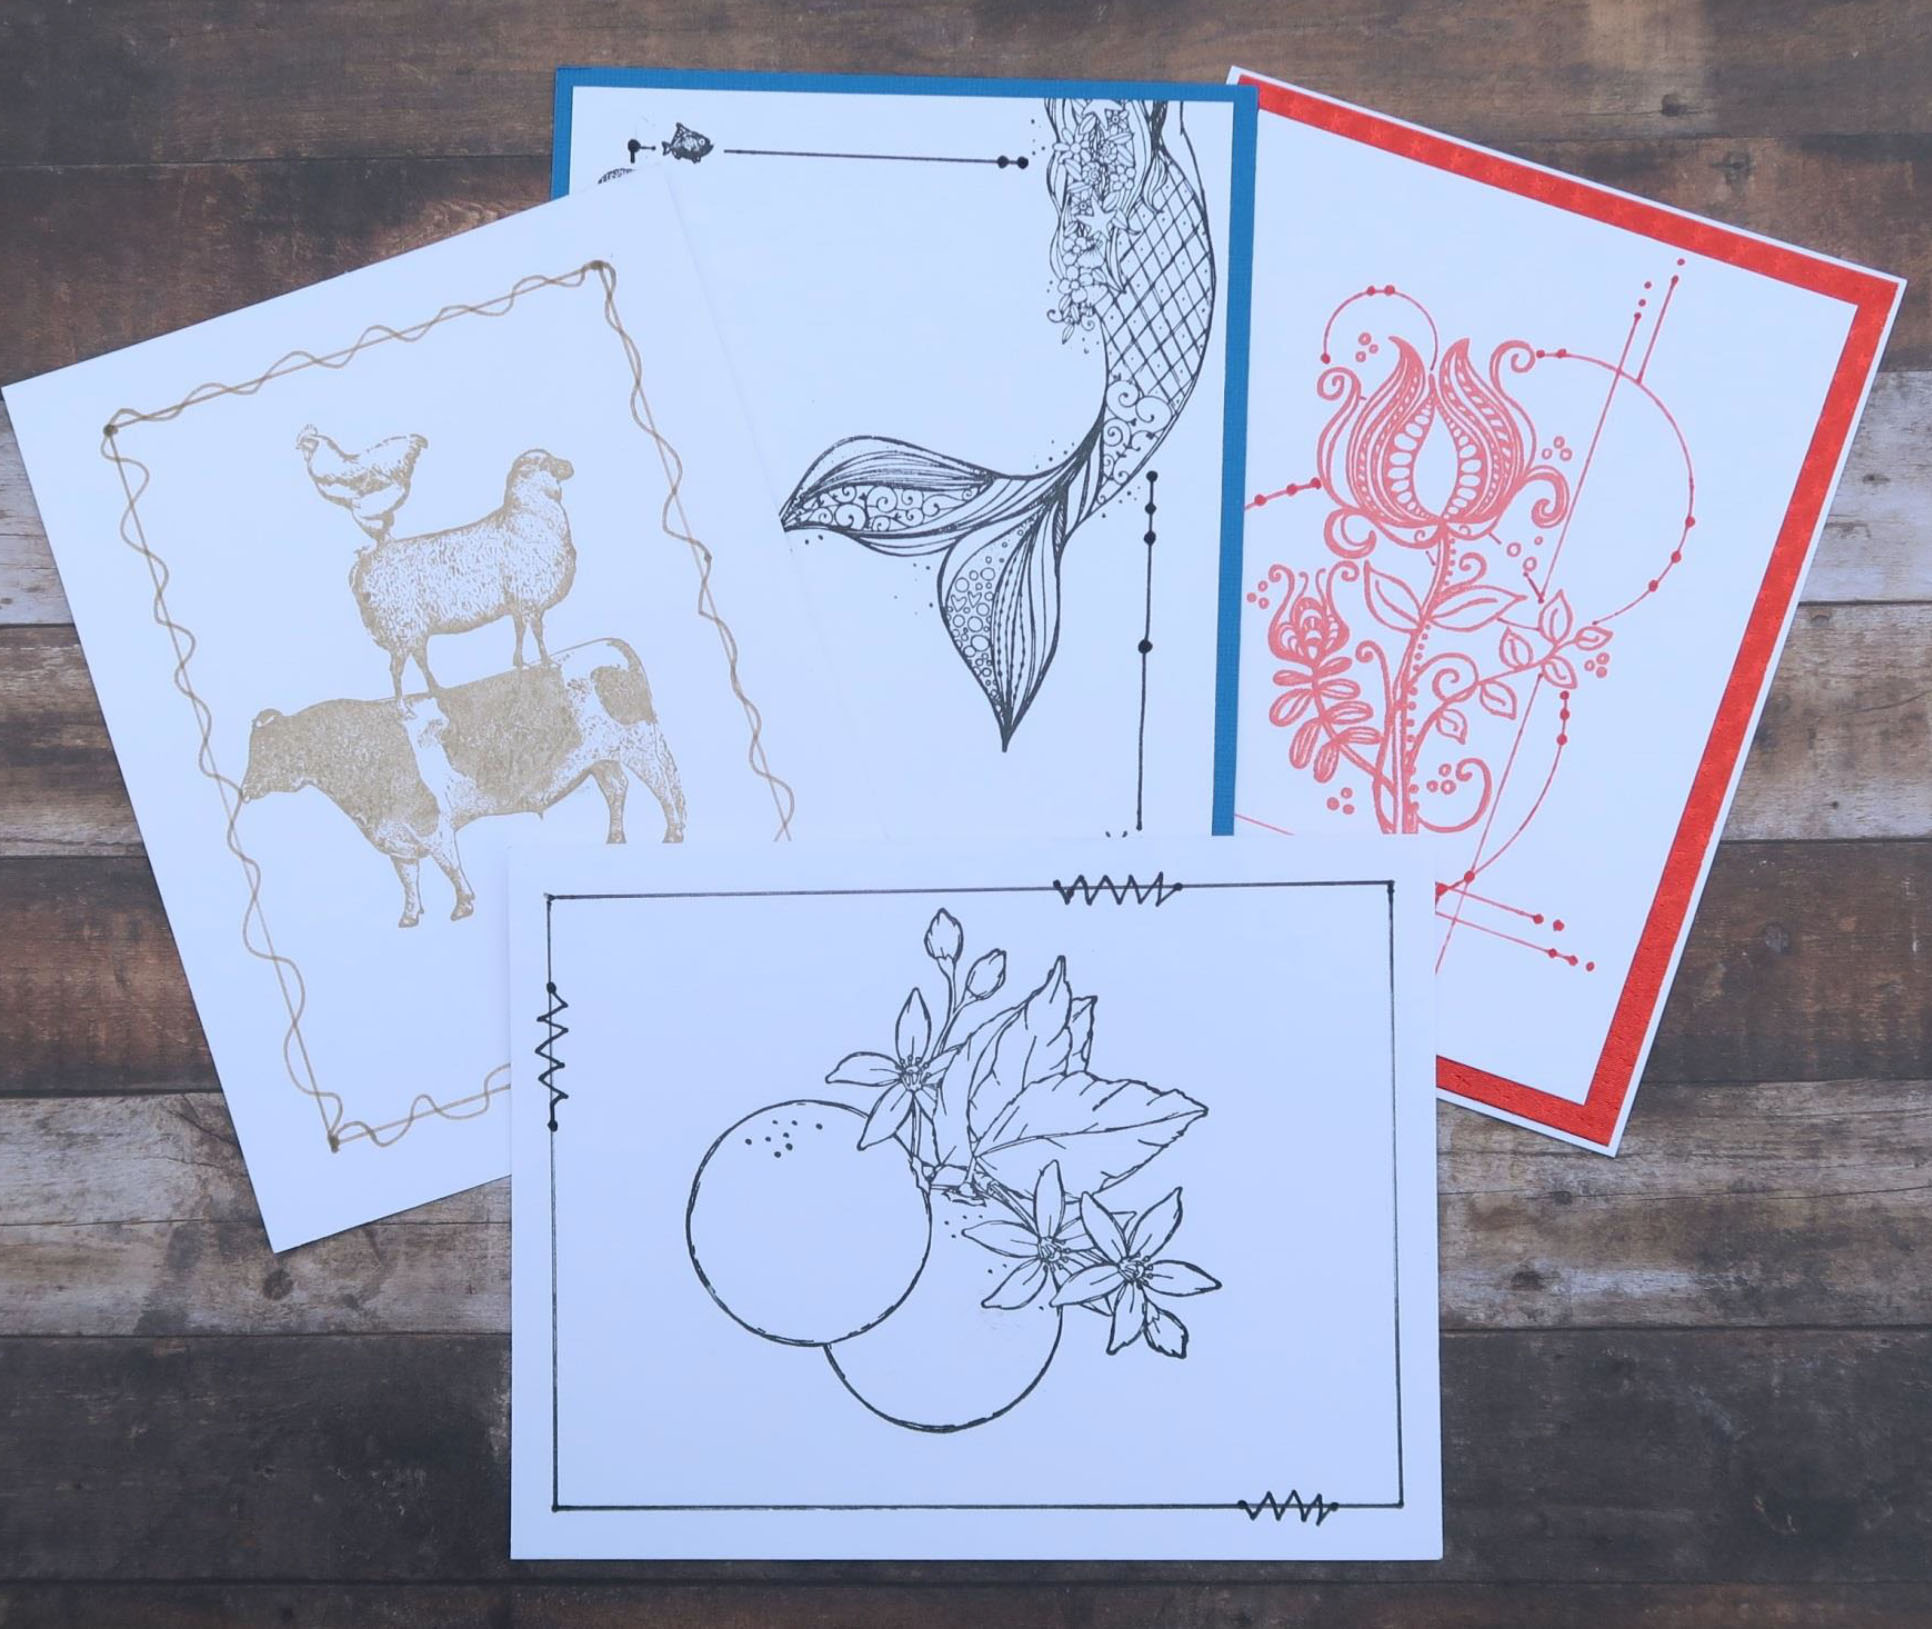 Greeting Cards made with a single stamp, a single ink pad, a pen and a straight edge.